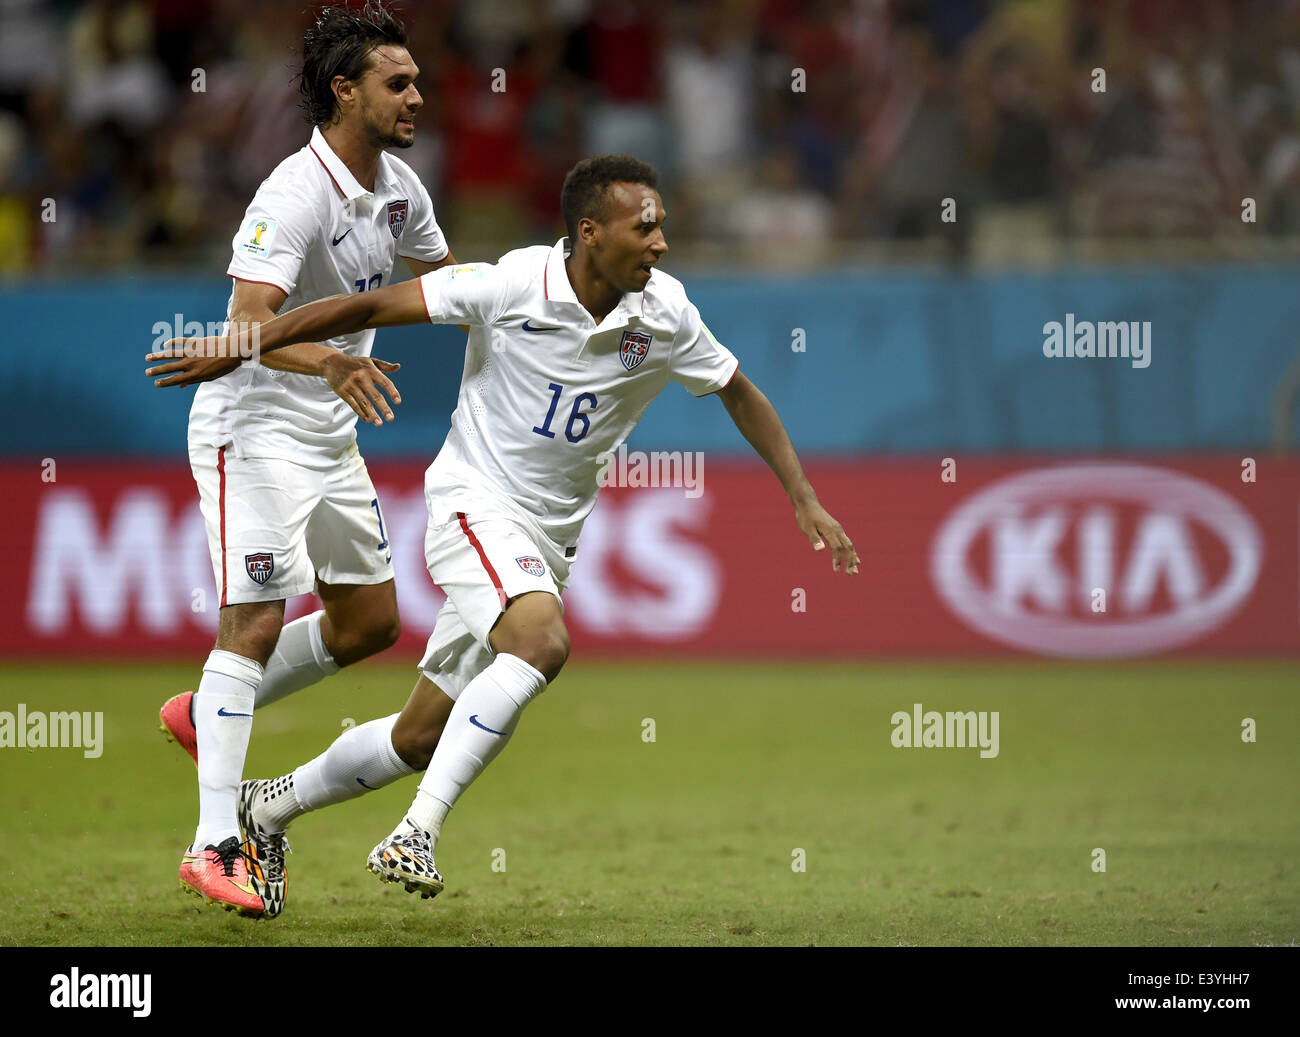 Salvador, Brazil. 1st July, 2014. Julian Green (R) and Chris Wondolowski of the U.S. celebrates the goal during the extra time of a Round of 16 match between Belgium and the U.S. of 2014 FIFA World Cup at the Arena Fonte Nova Stadium in Salvador, Brazil, on July 1, 2014. Belgium won 2-1 over the U.S. after 120 minutes and qualified for quarter-finals on Tuesday. Credit:  Yang Lei/Xinhua/Alamy Live News Stock Photo